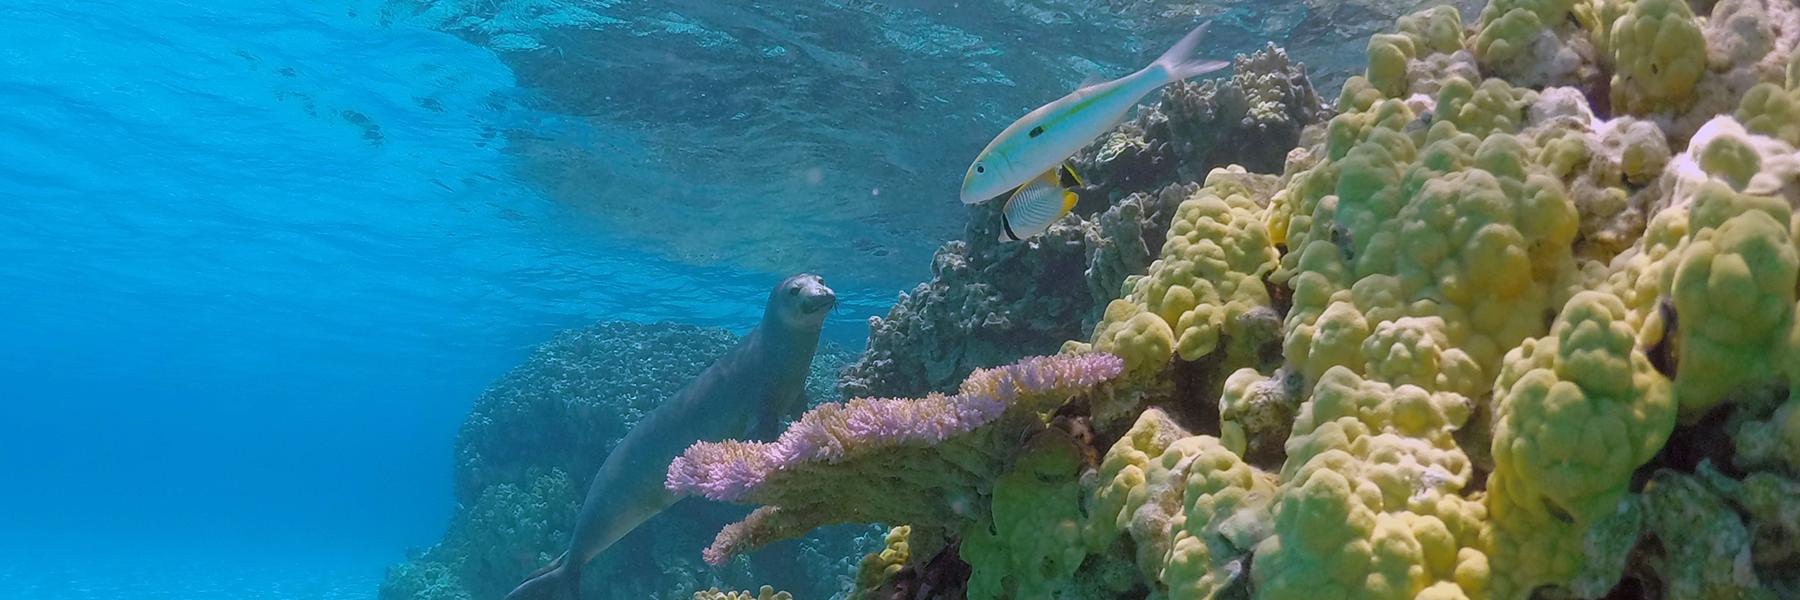 Undersea view of fish and a juvenile monk seal swimming around coral,link to article